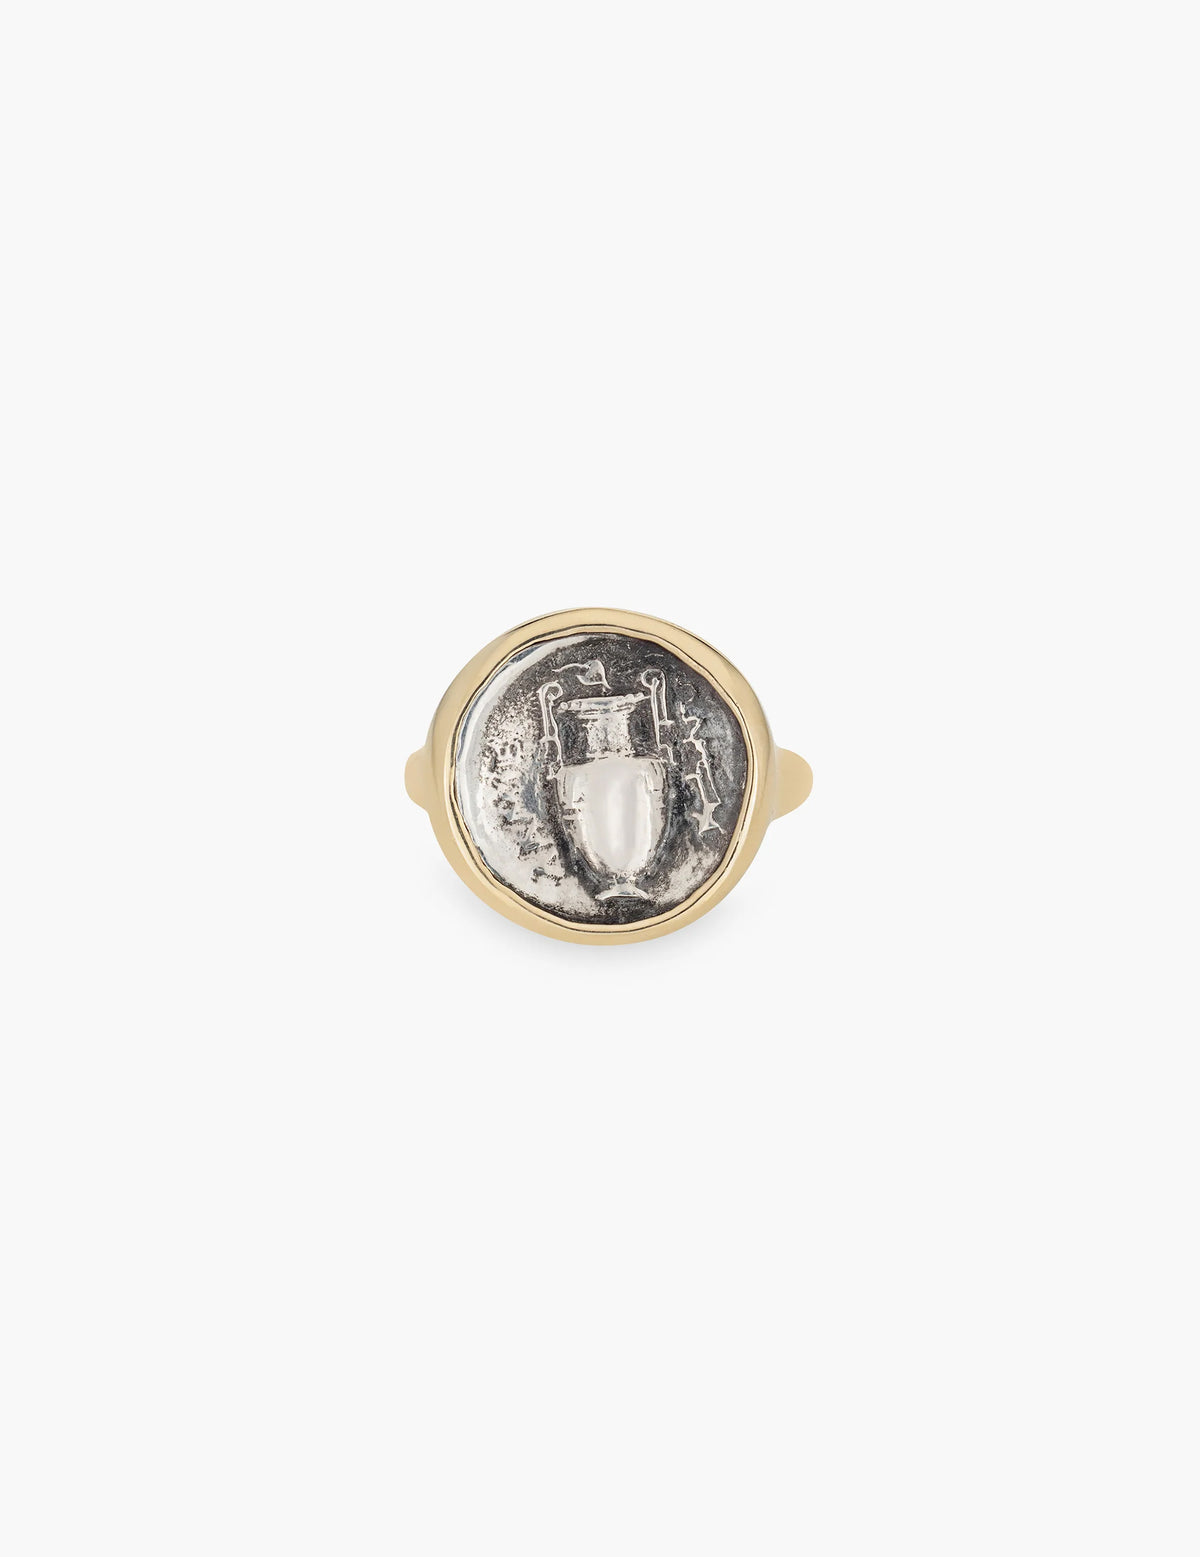 Urn Coin Ring in Gold and Sterling Silver